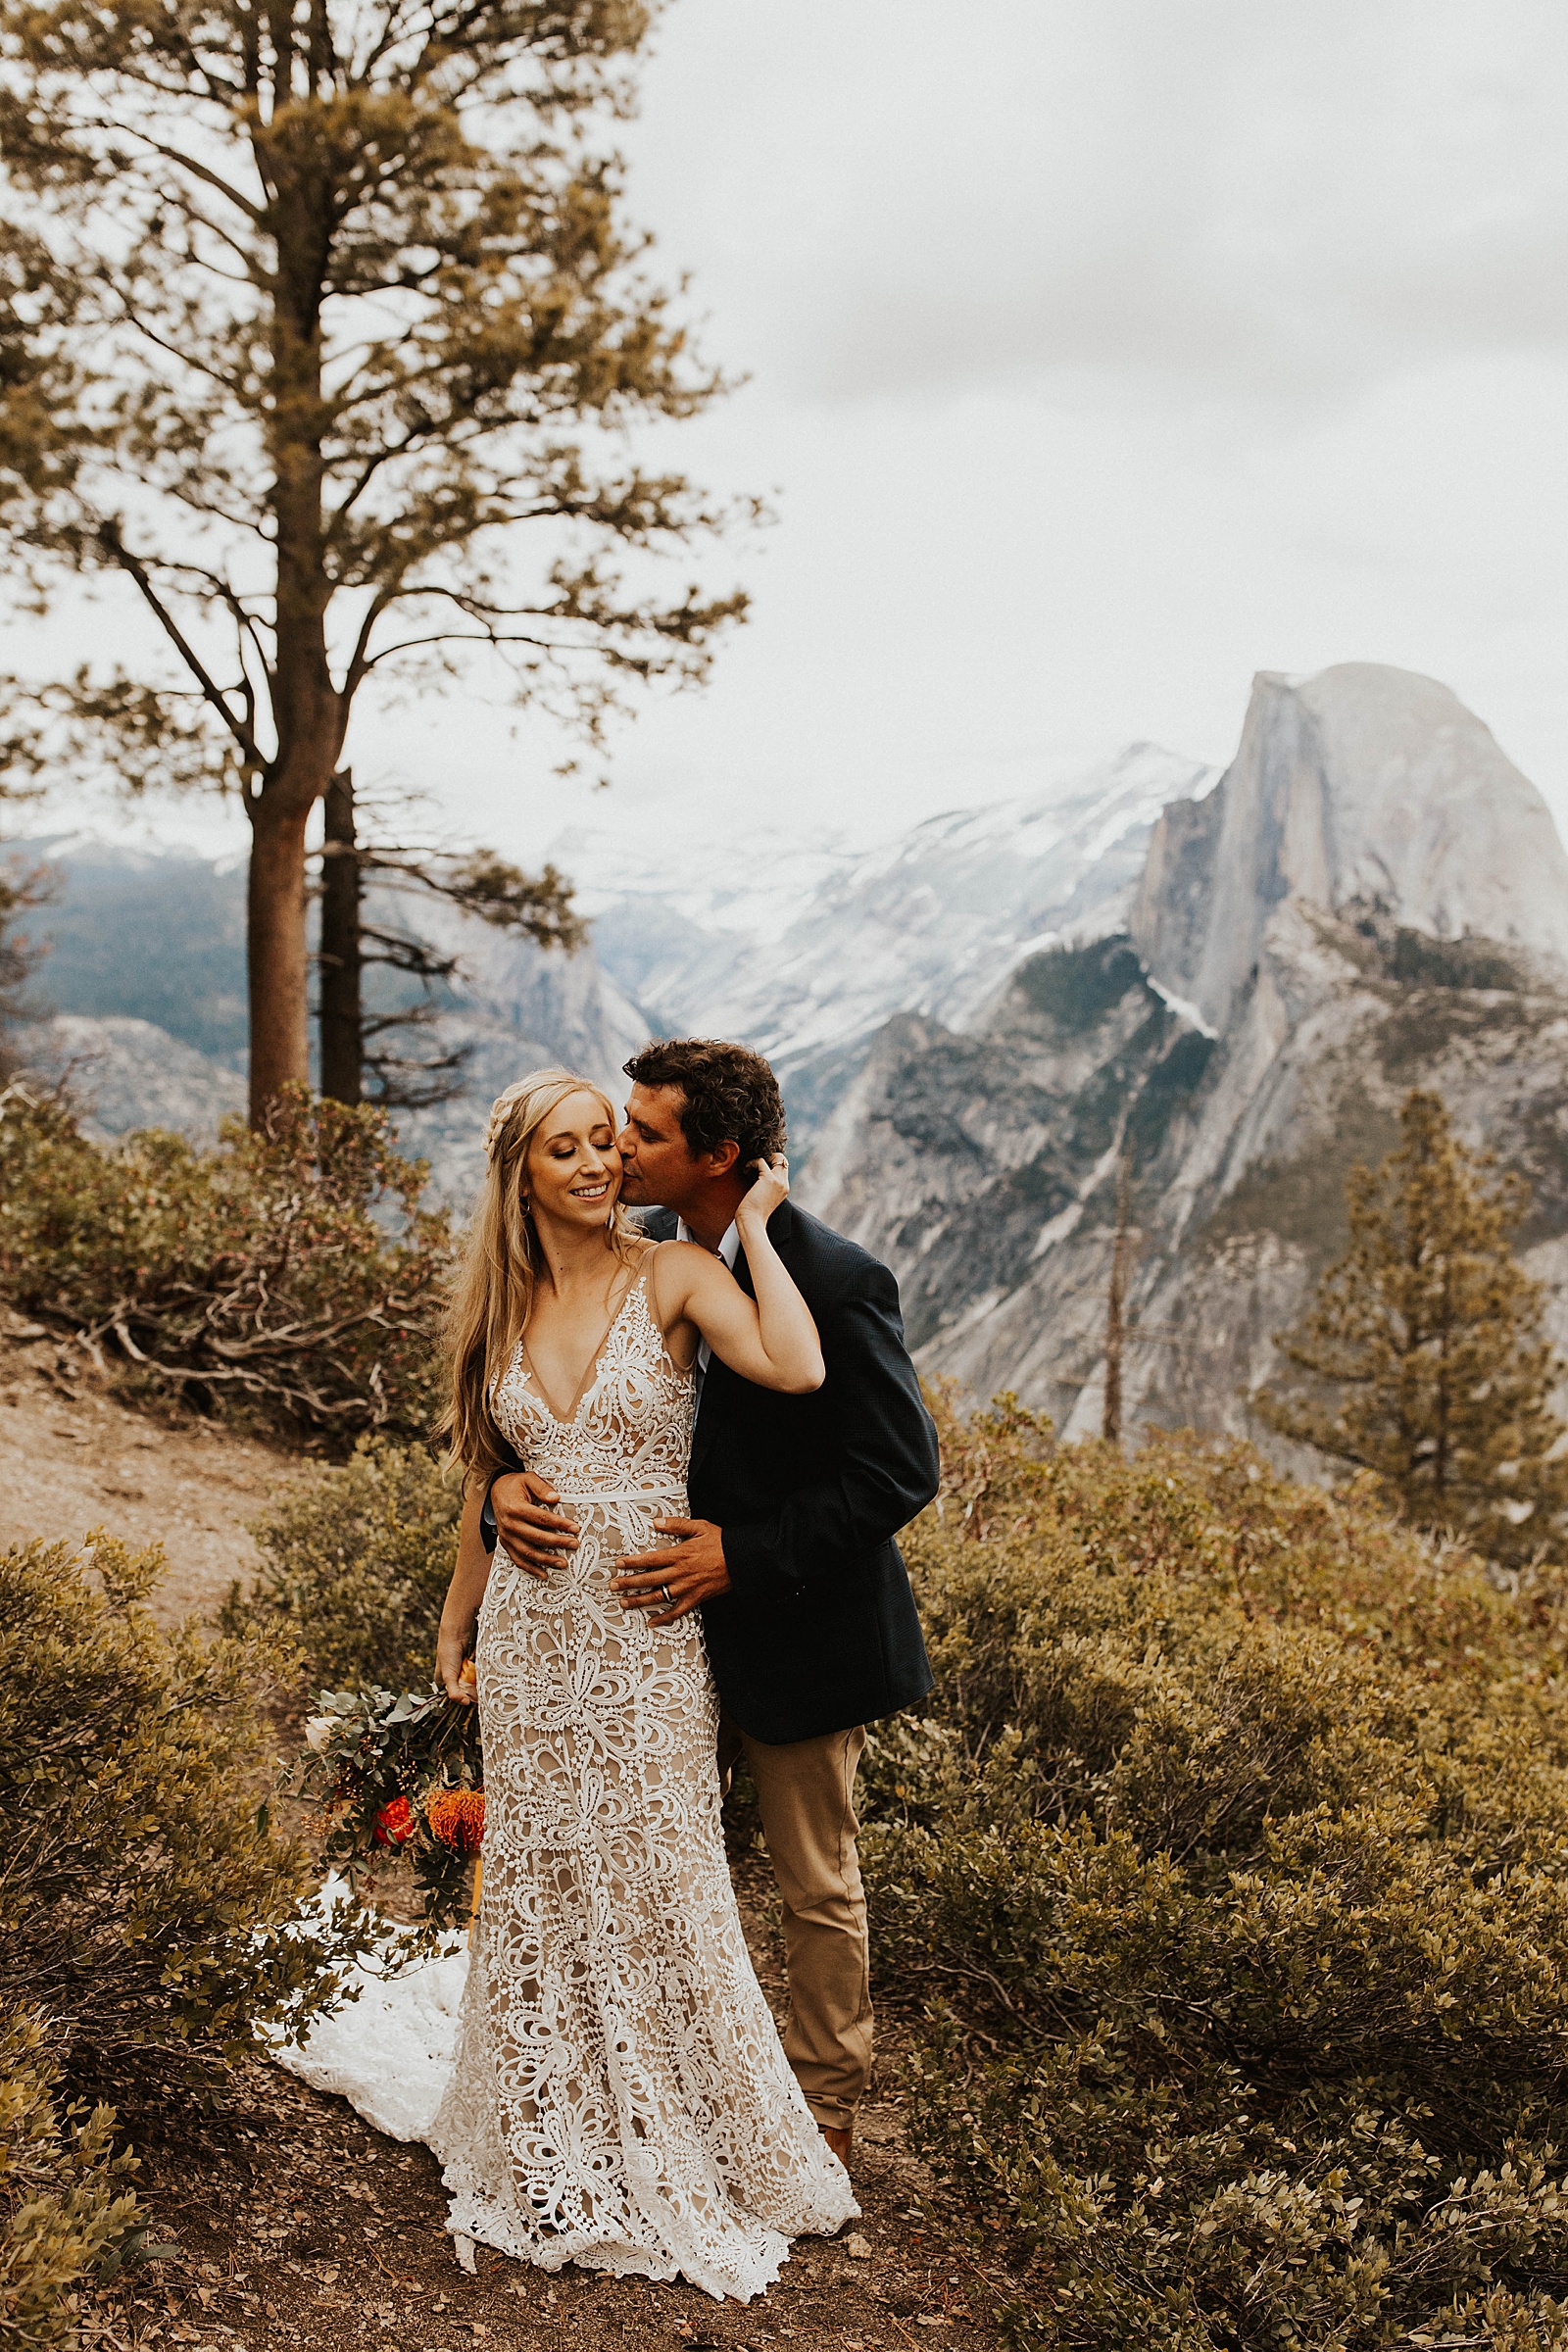 A bride and groom photo at Glacier Point in Yosemite National Park.